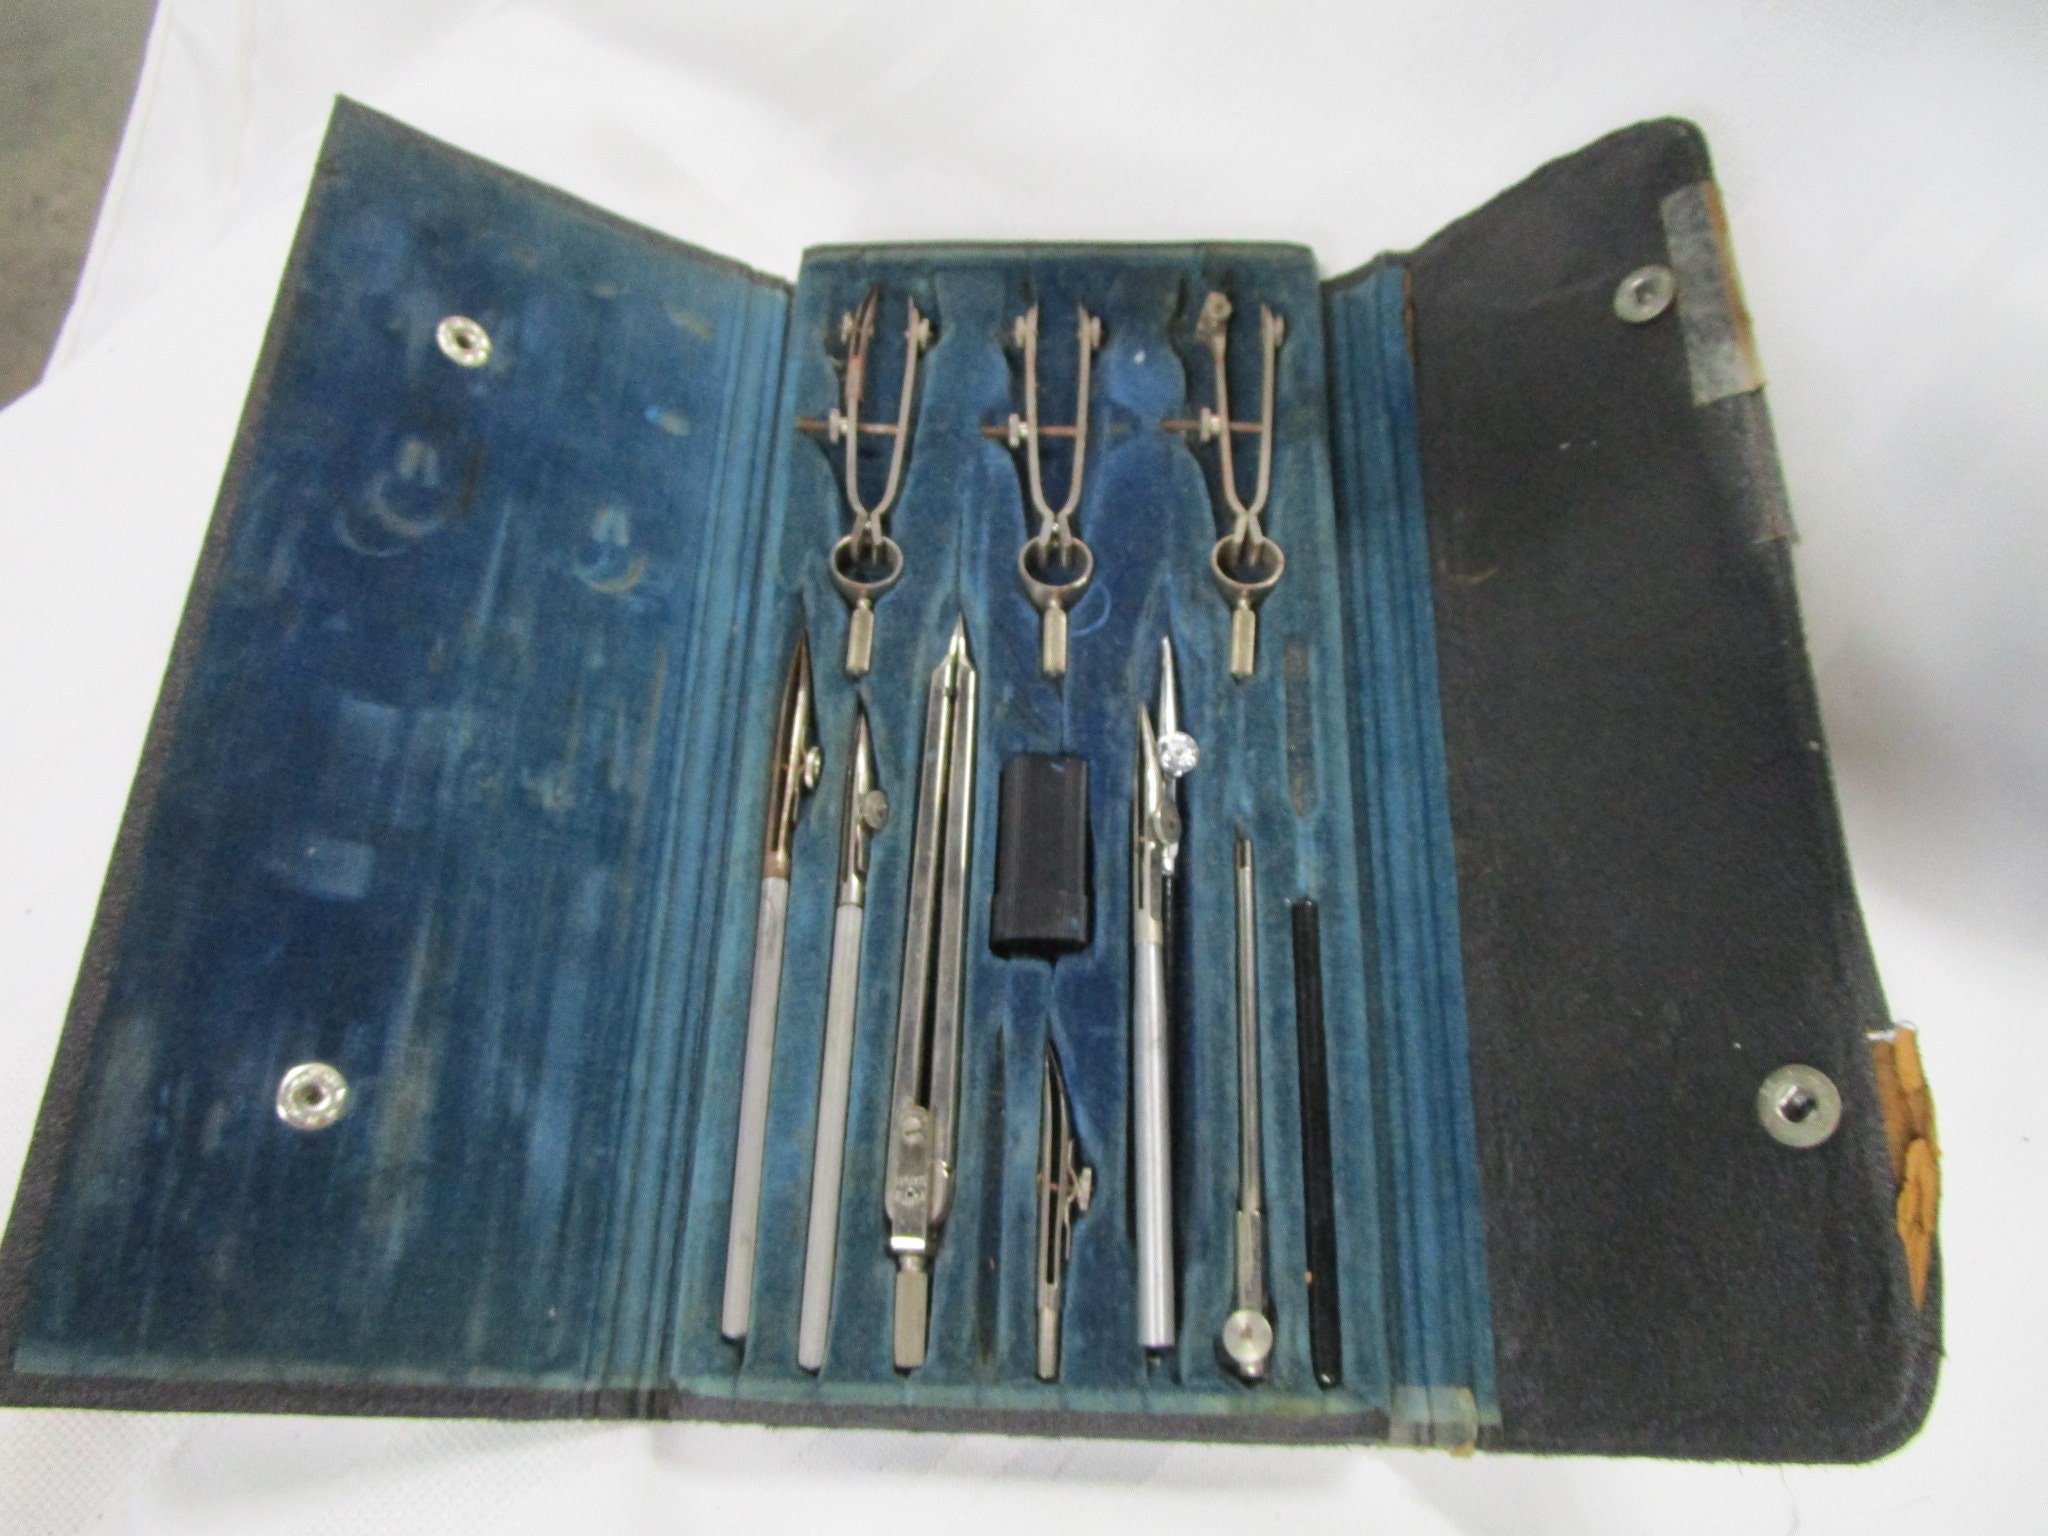 Vintage Technical Drawing Set, GRAMERCY Professional Drawing Set, Drafting  Tools, Drawing Case Set,drafting Set, Drawing Instruments, 